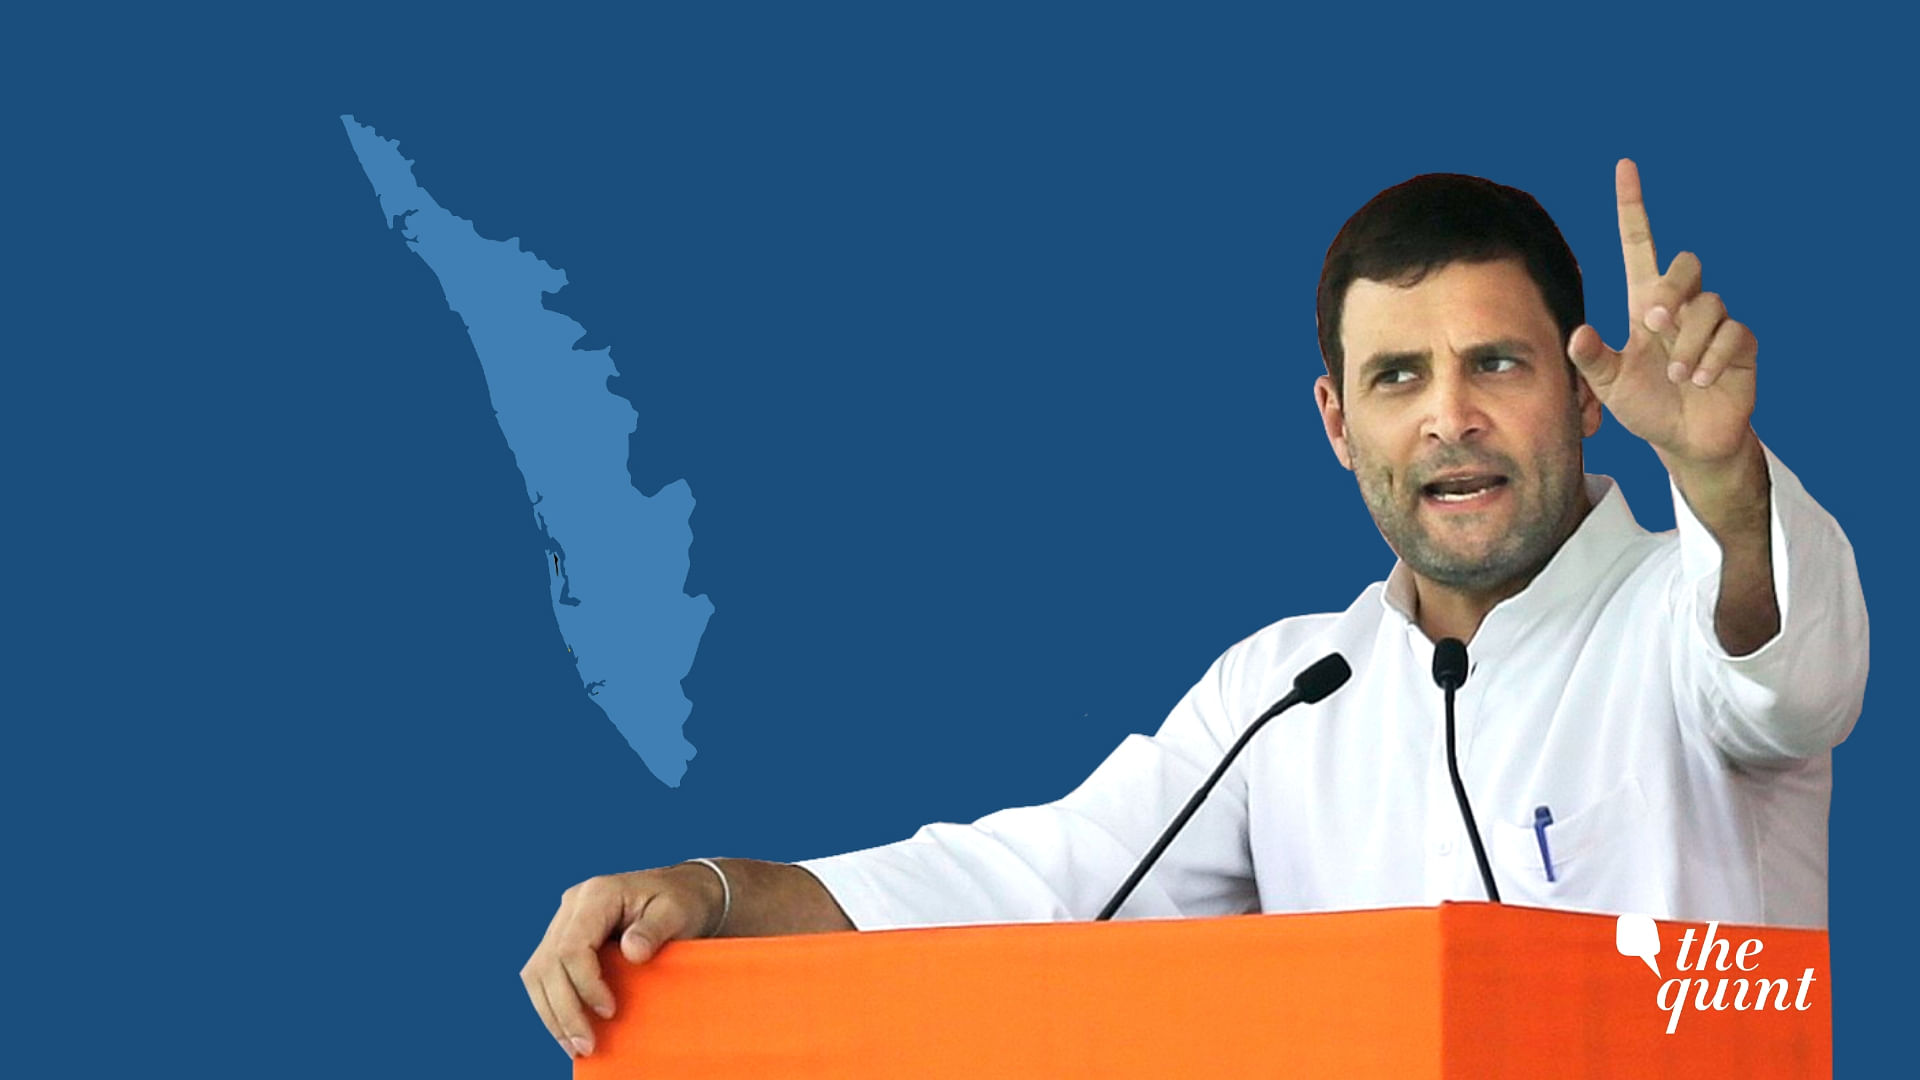 The Congress has decided that Rahul Gandhi will contest from one more seat – far away from Amethi – the safe seat of Wayanad in Kerala.